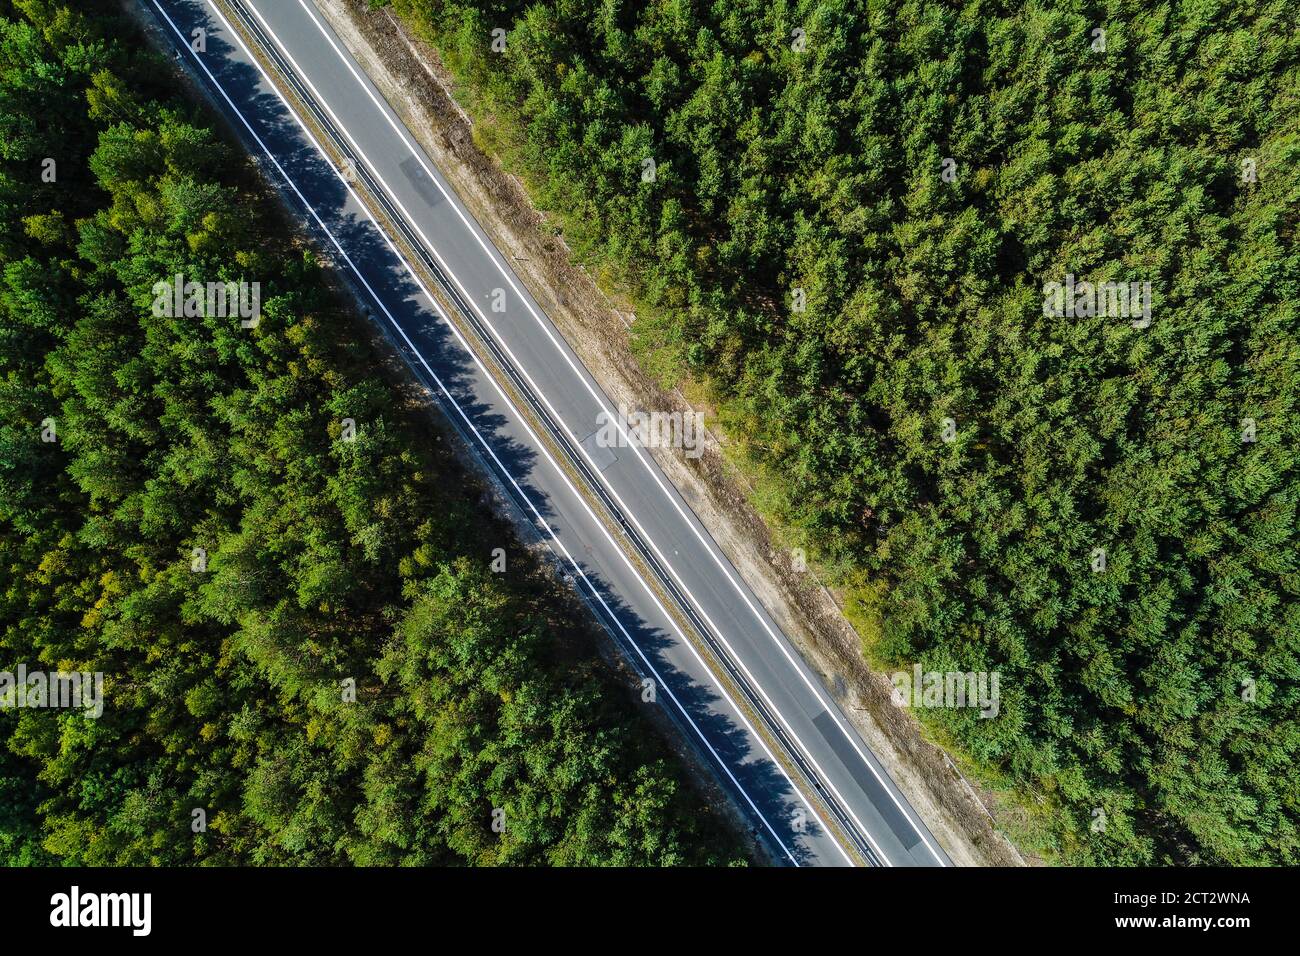 Looking like a highway, the road runs through the forest. The forest is located on both sides of the road Stock Photo